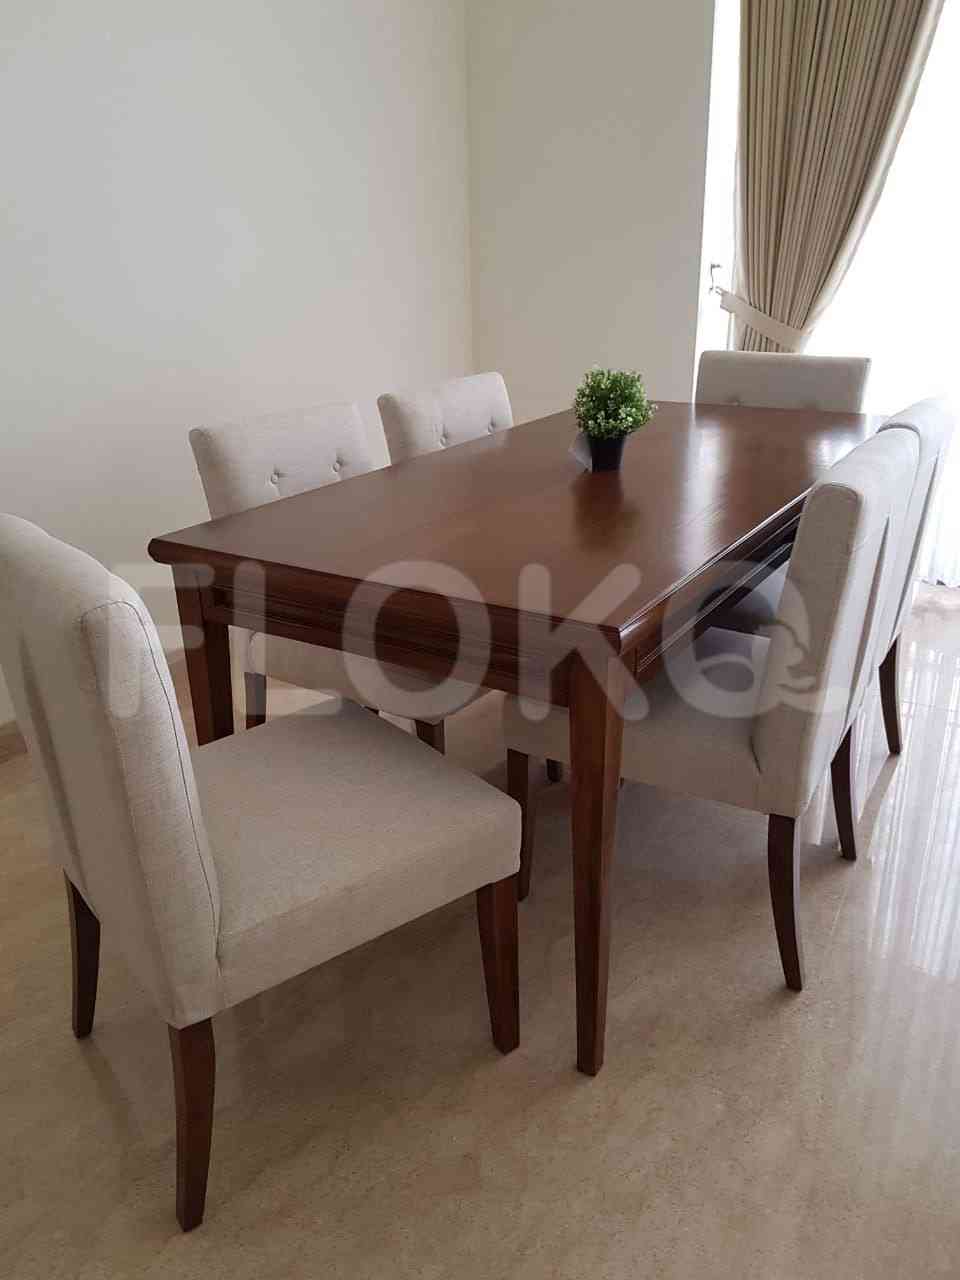 2 Bedroom on 18th Floor for Rent in Pakubuwono Spring Apartment - fga4a1 7